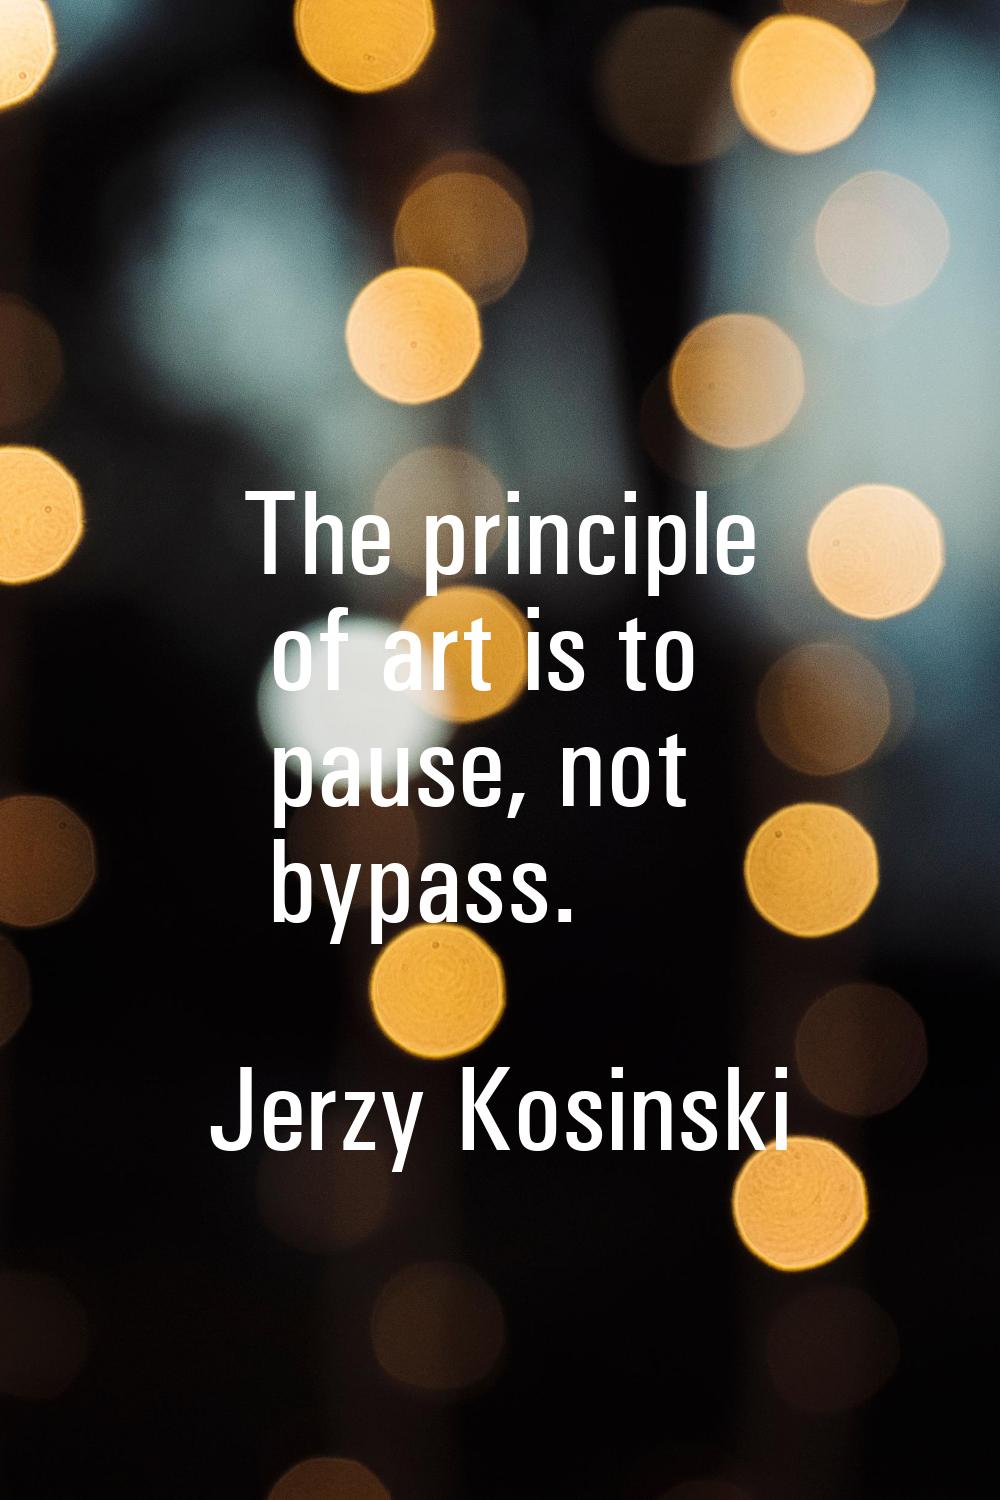 The principle of art is to pause, not bypass.